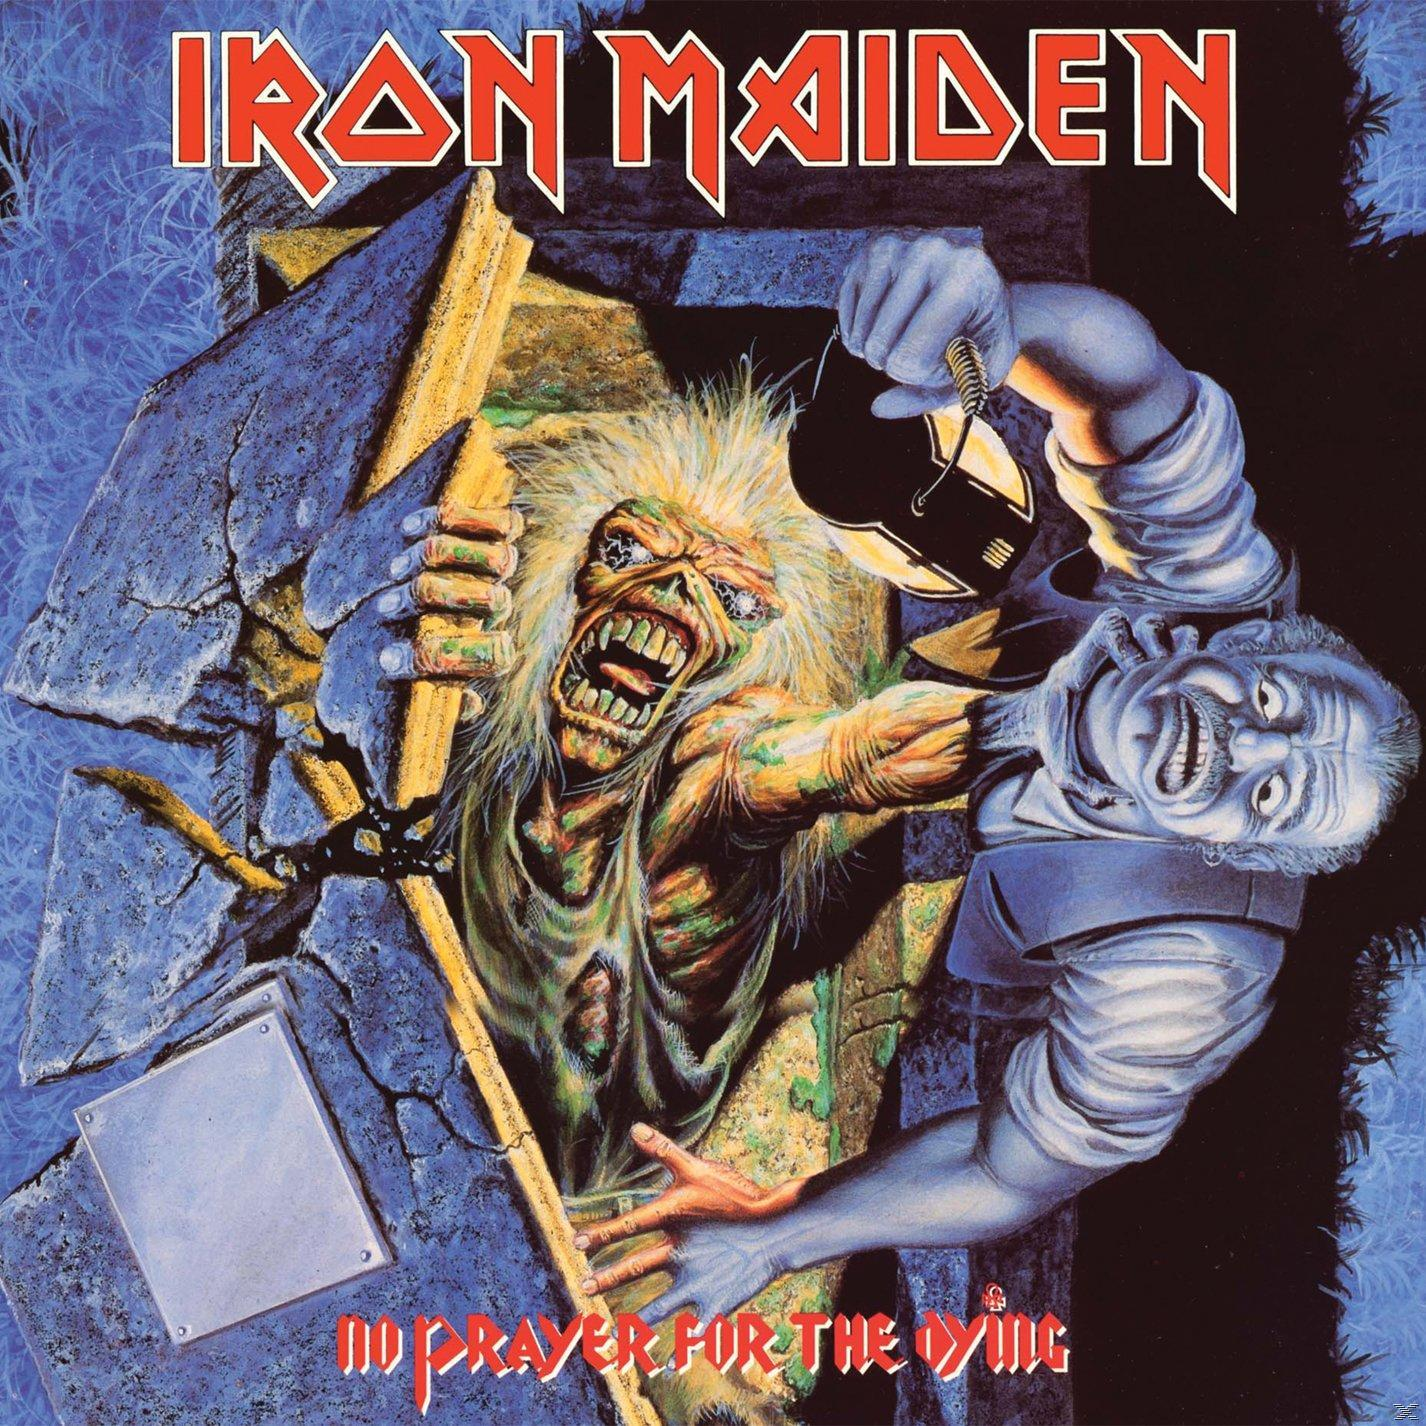 Iron - No (Vinyl) Maiden The Dying Prayer - For